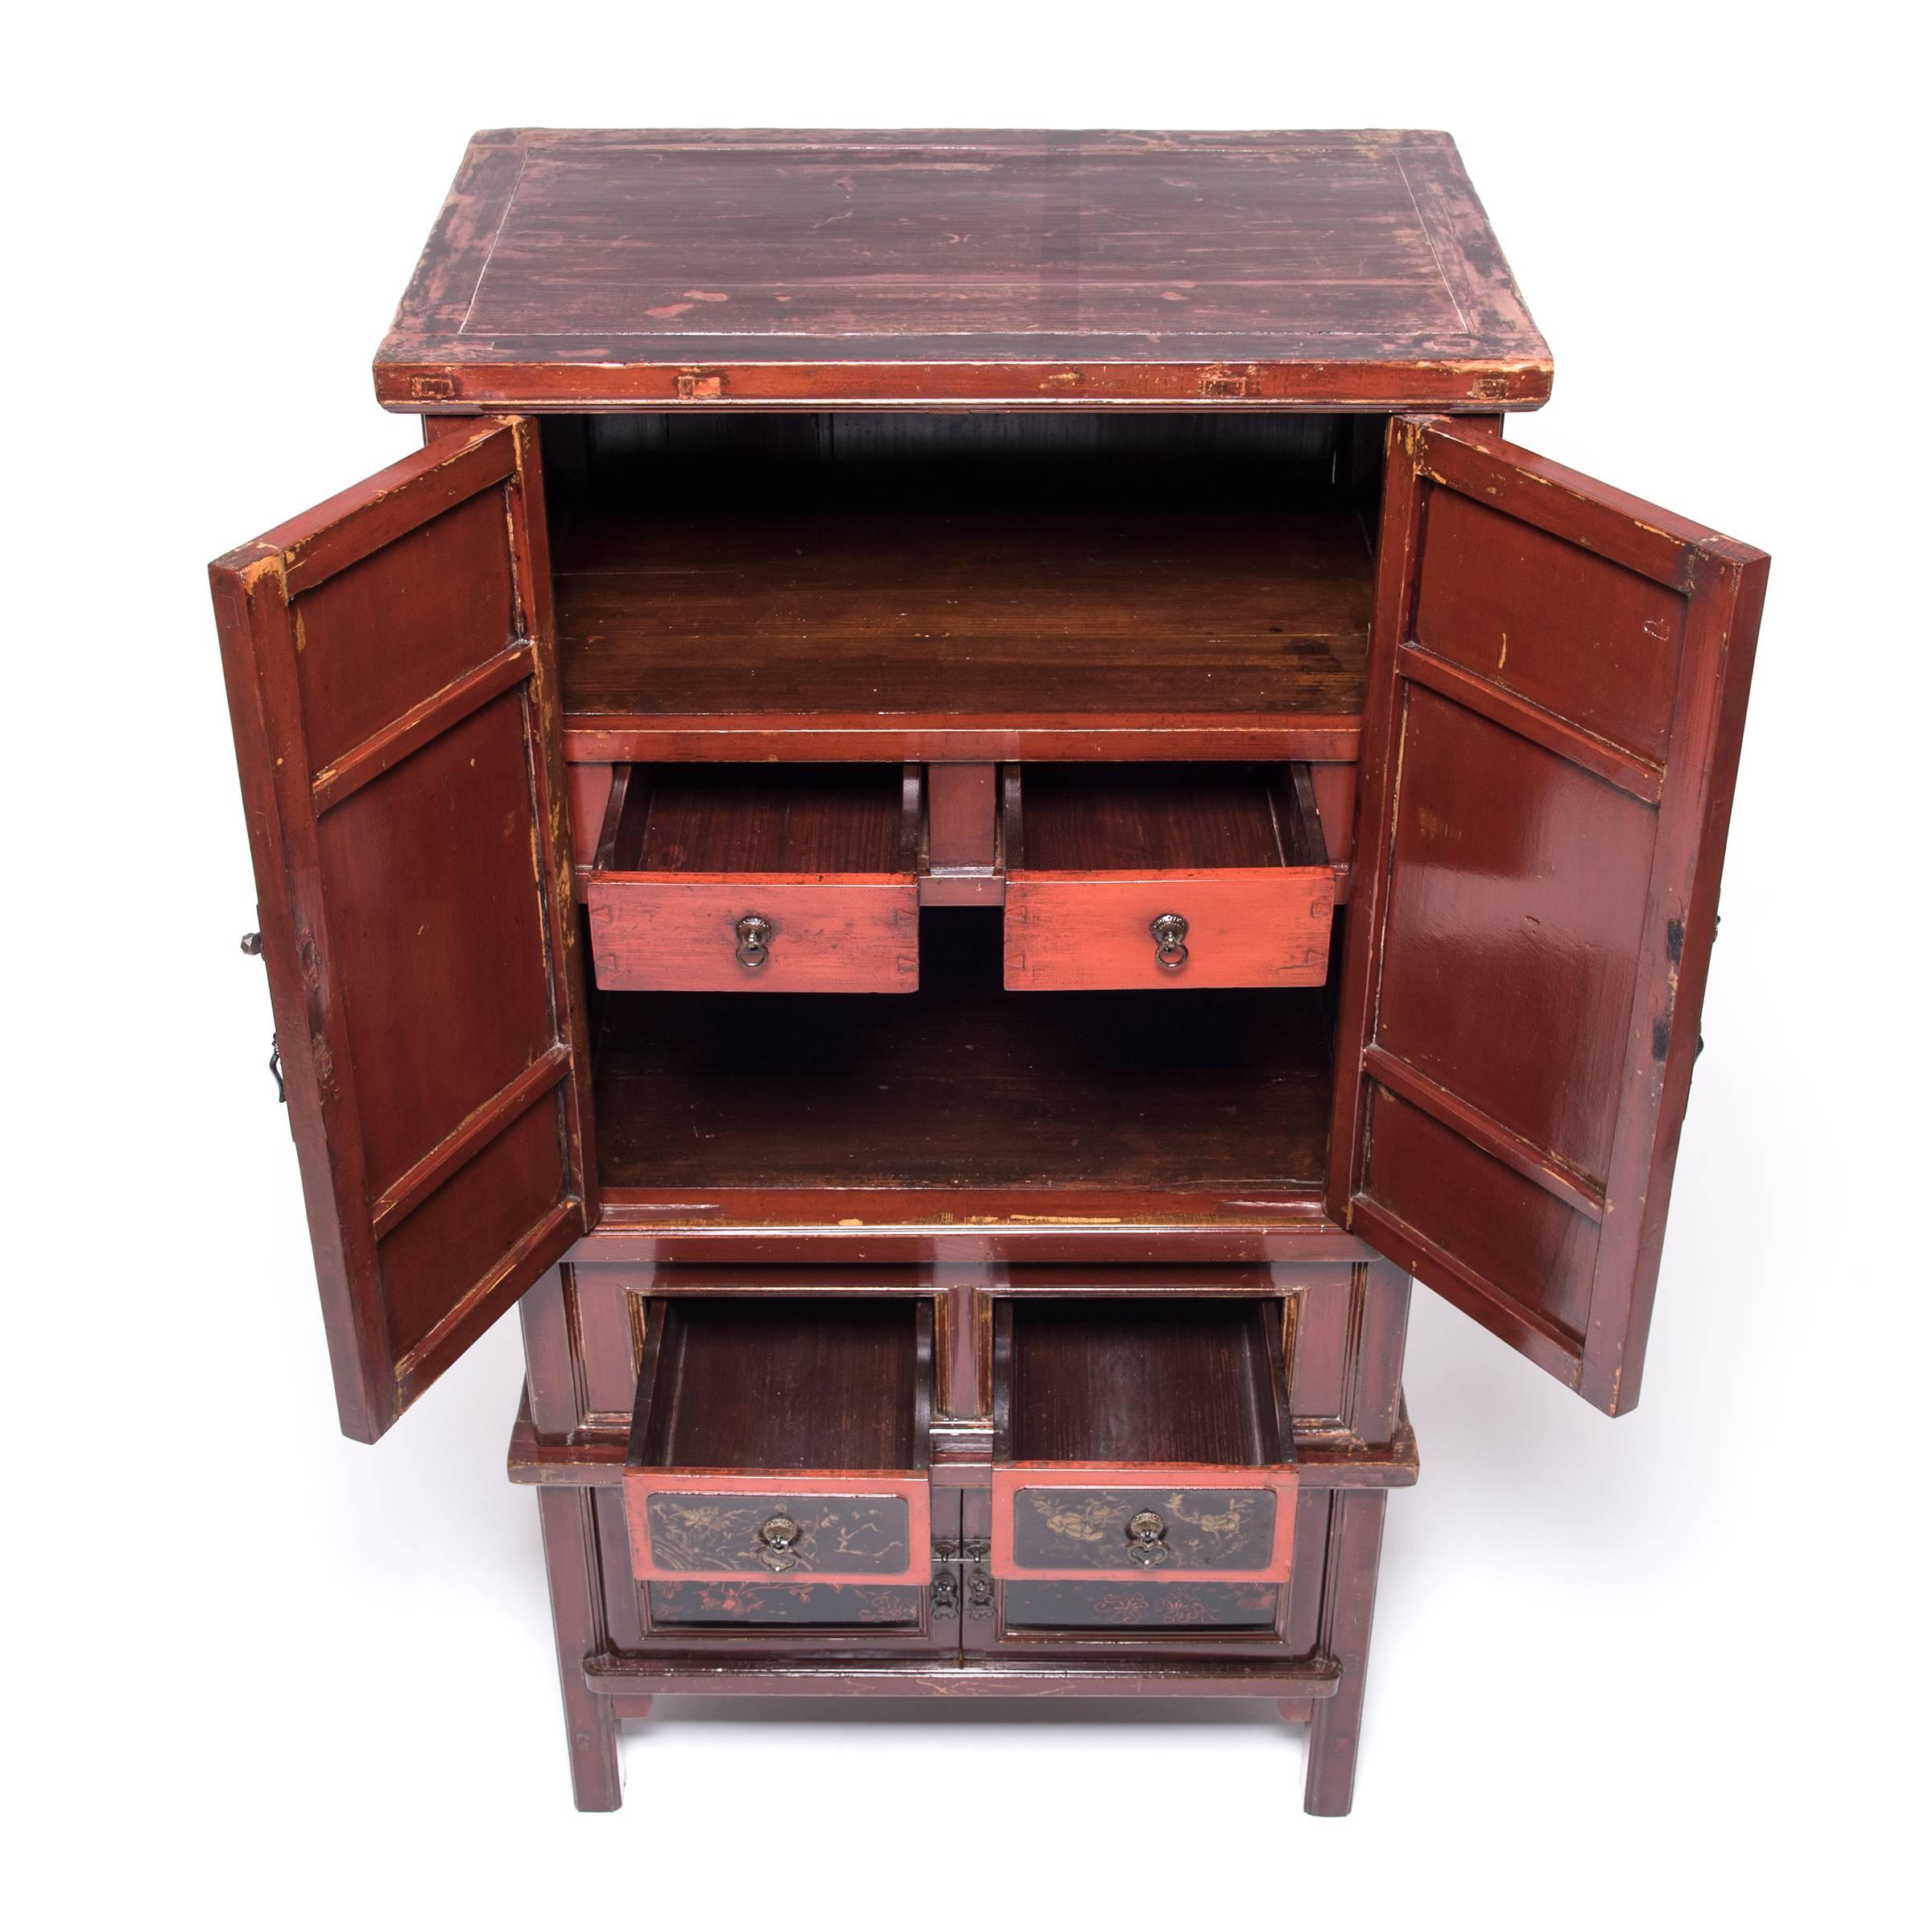 Elm Chinese Gilt Red Lacquer Cabinet, c. 1900